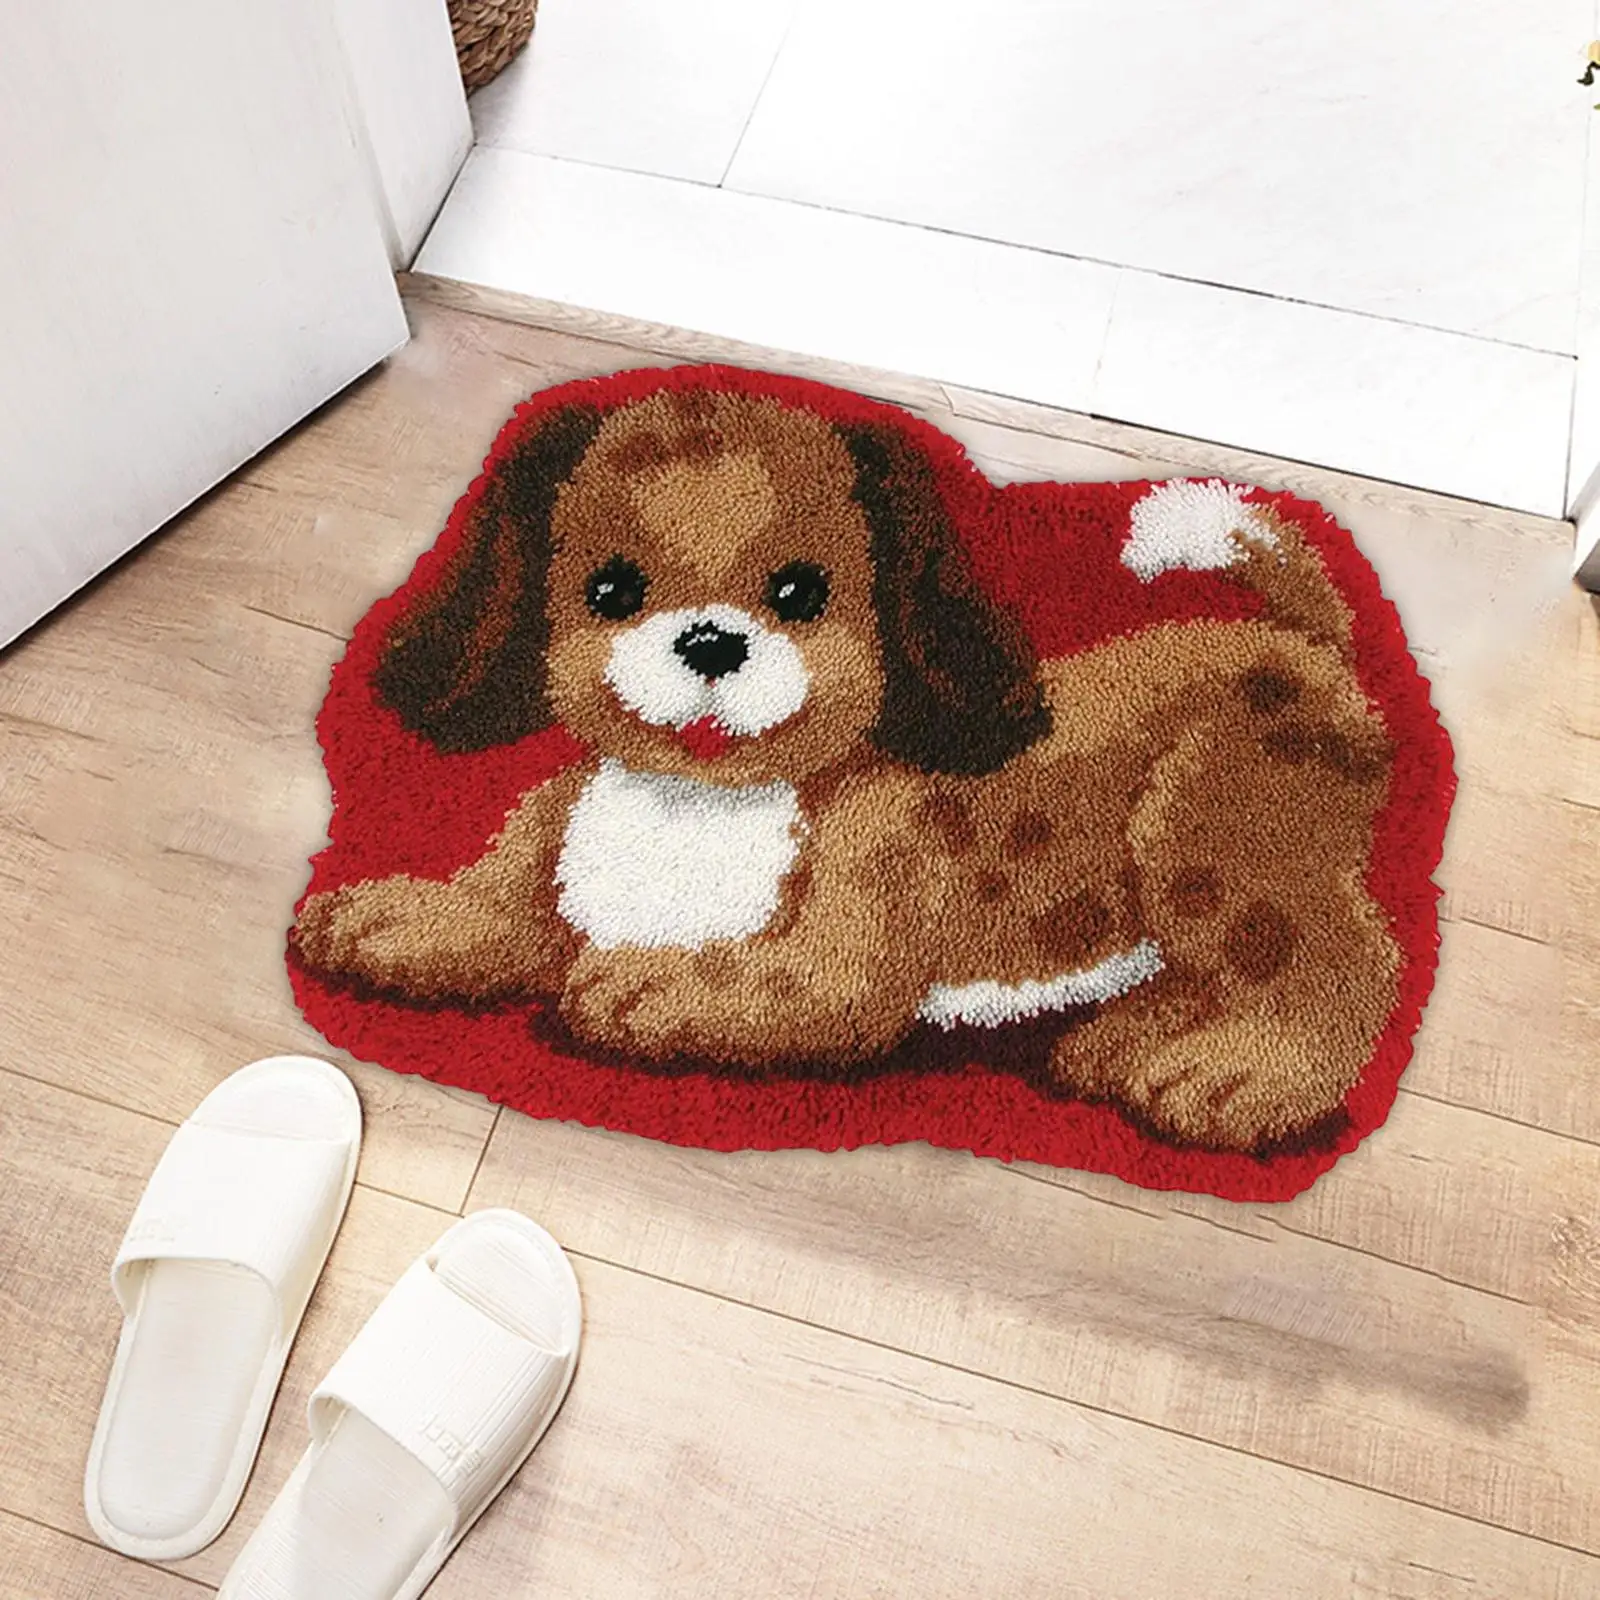 Latch DIY Rug Making Kit Embroidery Rug Kit Cute Dog 24 X 16 Inch Animal Pattern Rug Latch Hook Kits for Rug Home Beginners